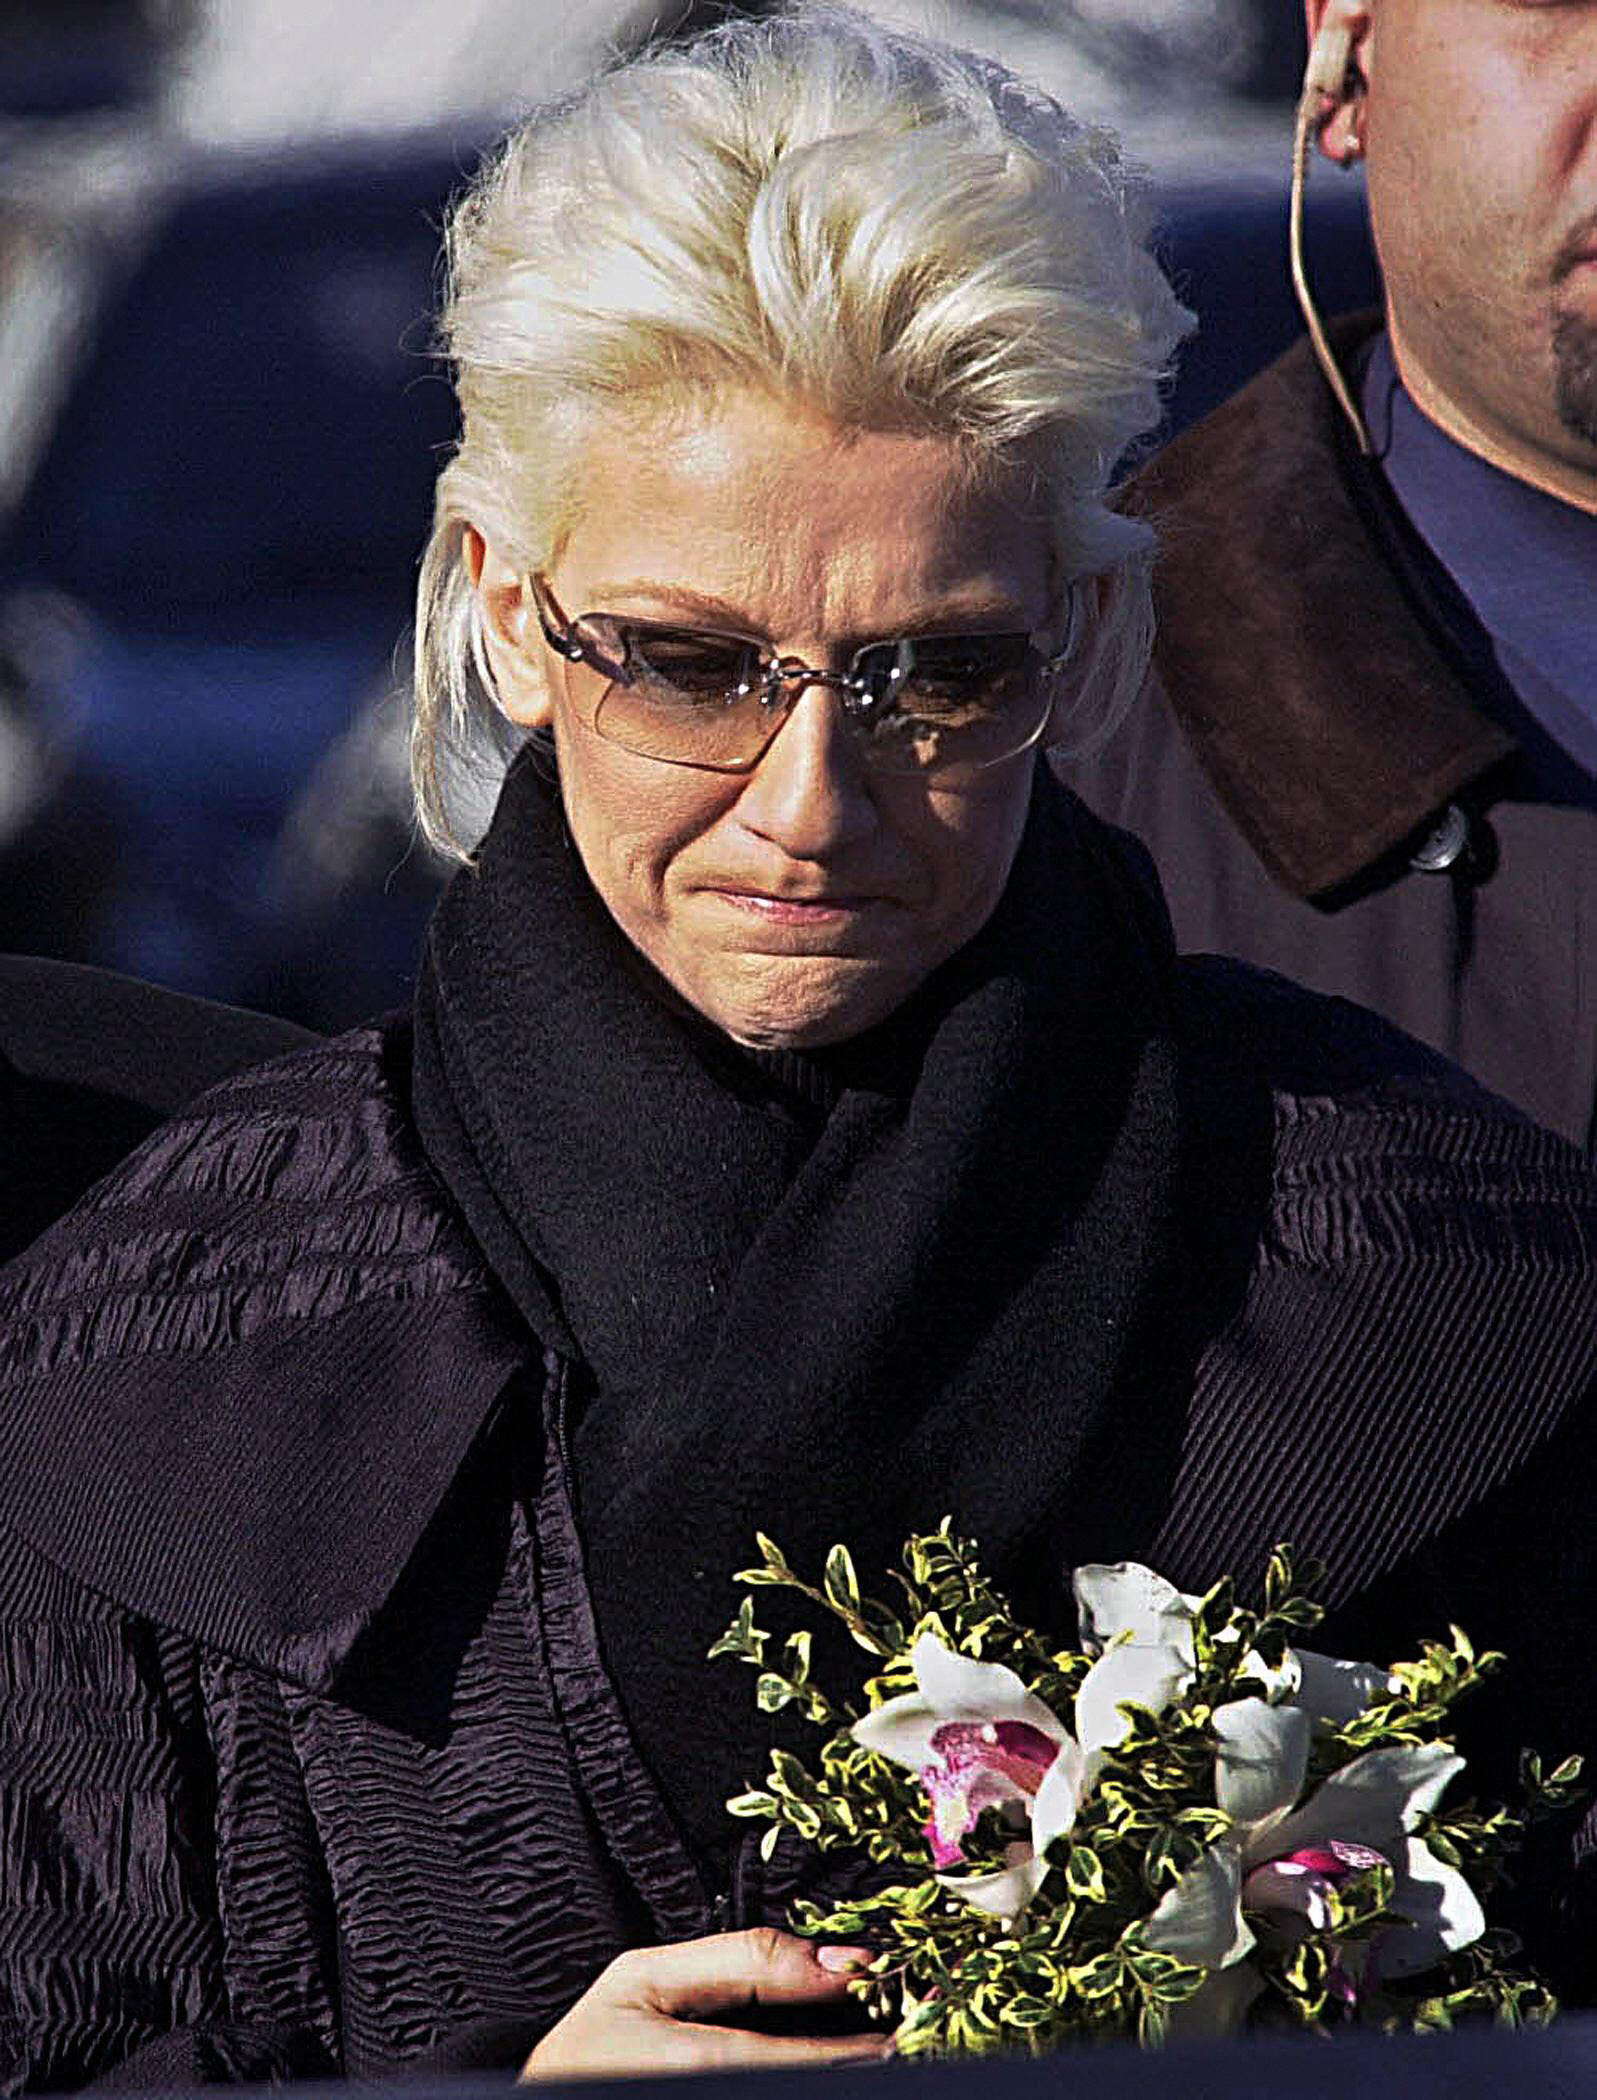 Celine Dion leaves a church following a funeral service for Adhemar Dion in Charlemagne, near Montreal, on December 4, 2003. | Source: Getty Images